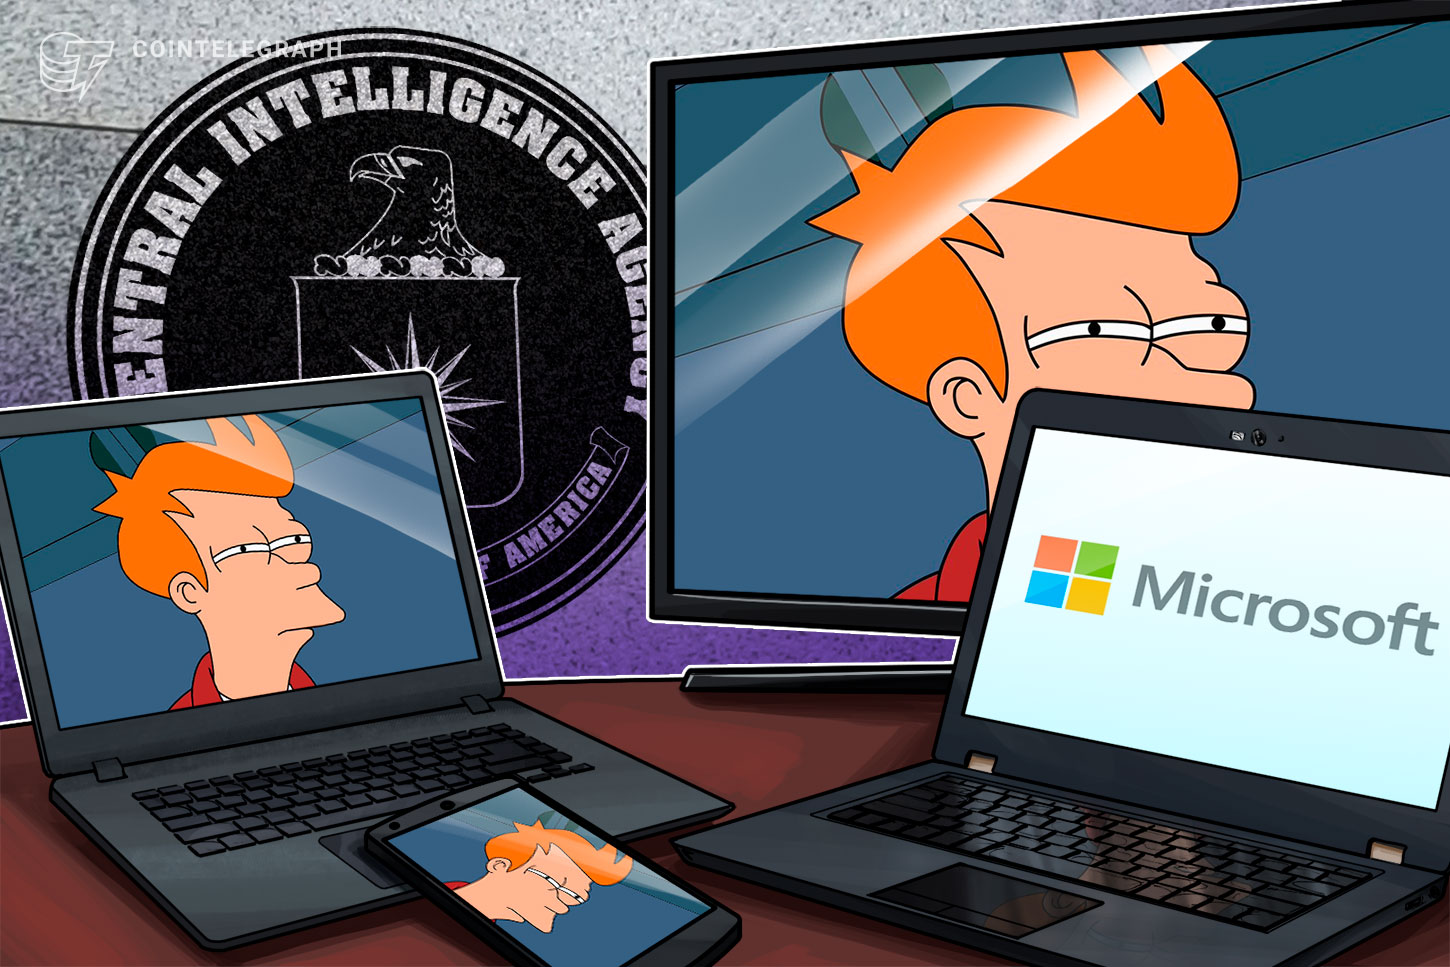 Ex-CIA agent drags Microsoft’s crypto patent into right-wing conspiracy